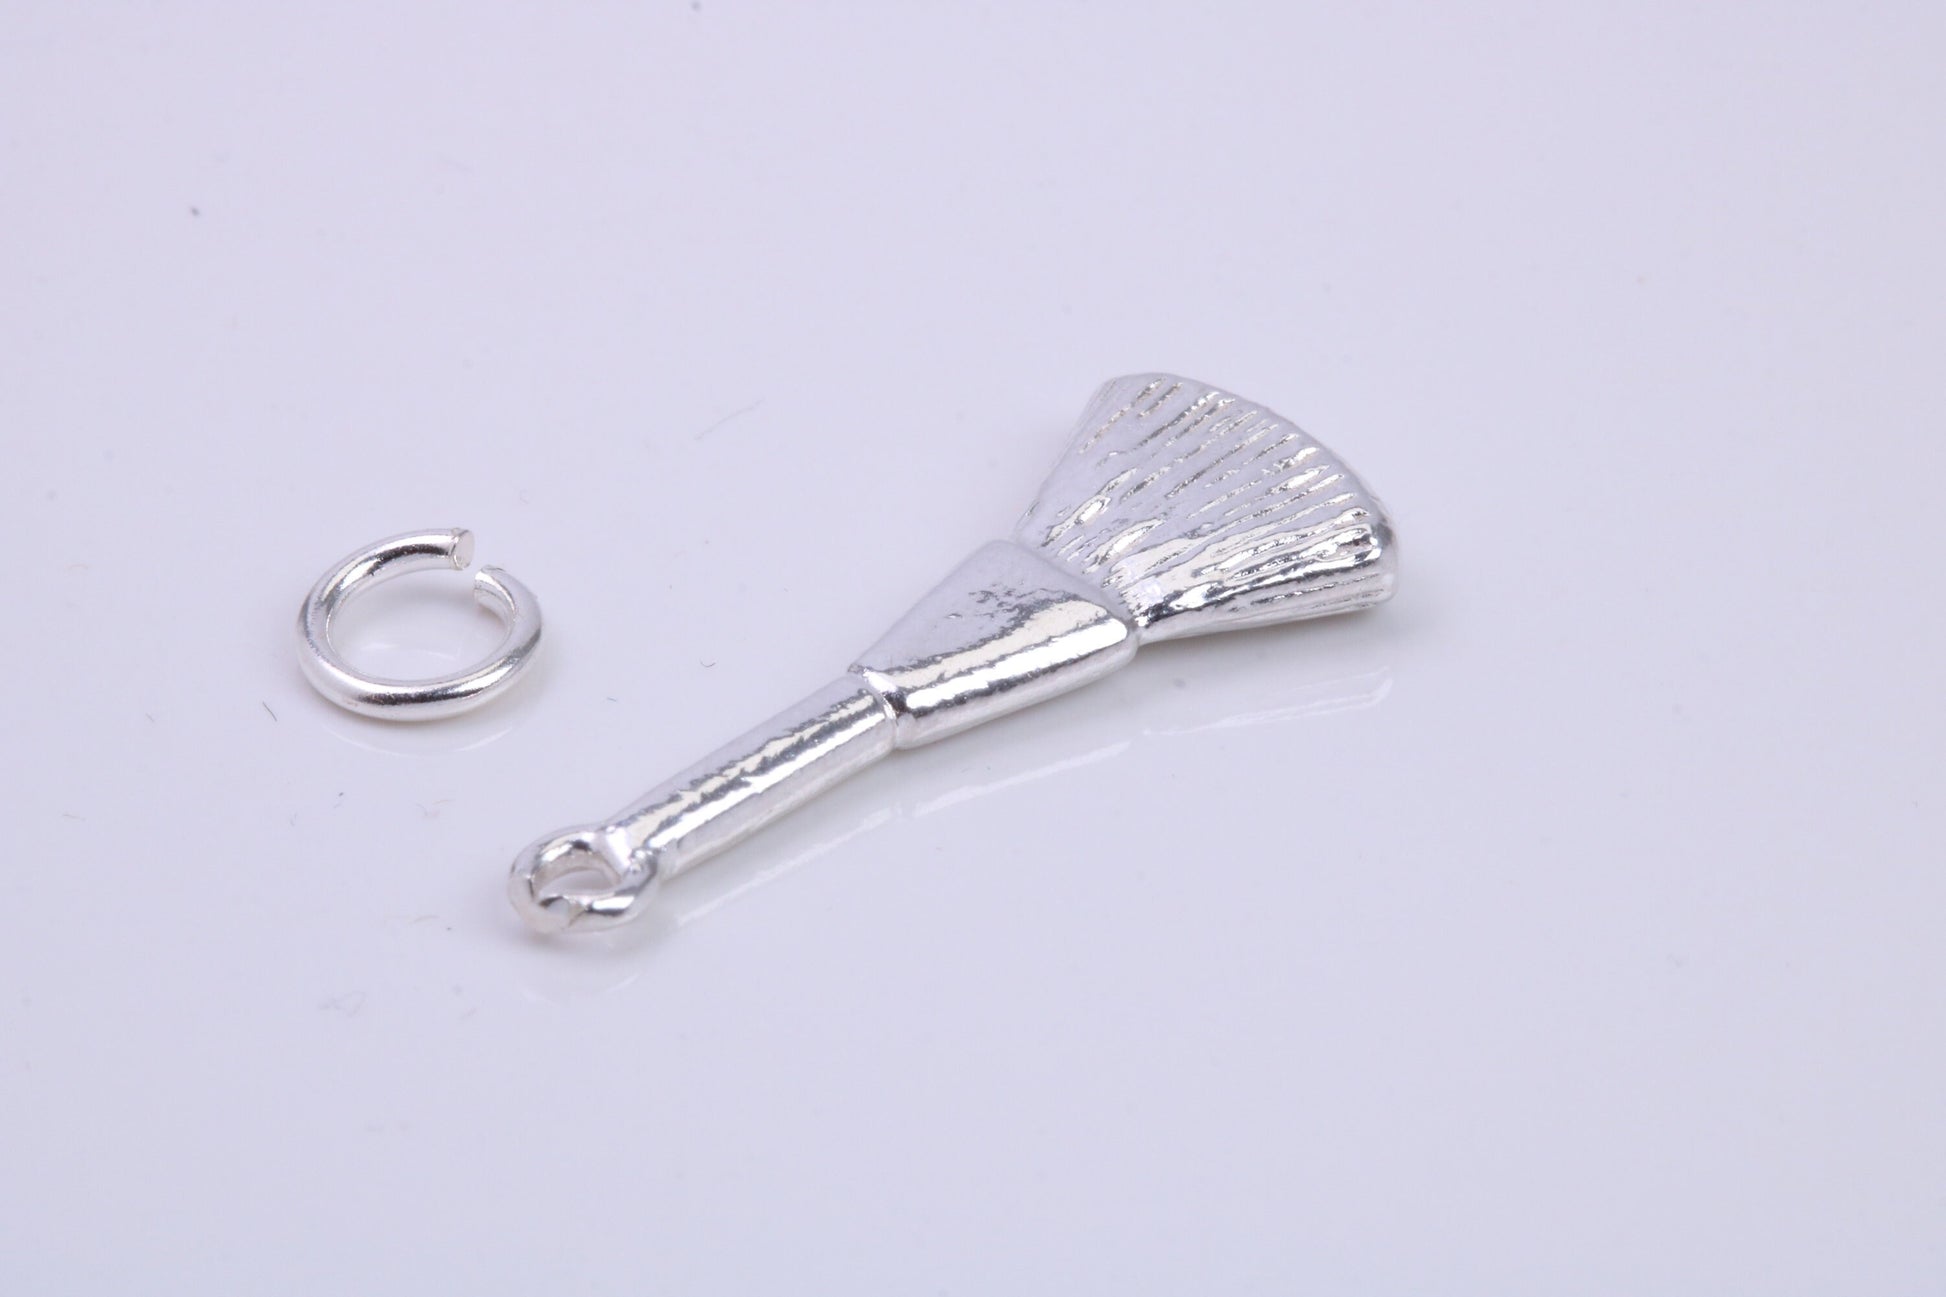 Make Up Brush Charm, Traditional Charm, Made from Solid 925 Grade Sterling Silver, Complete with Attachment Link